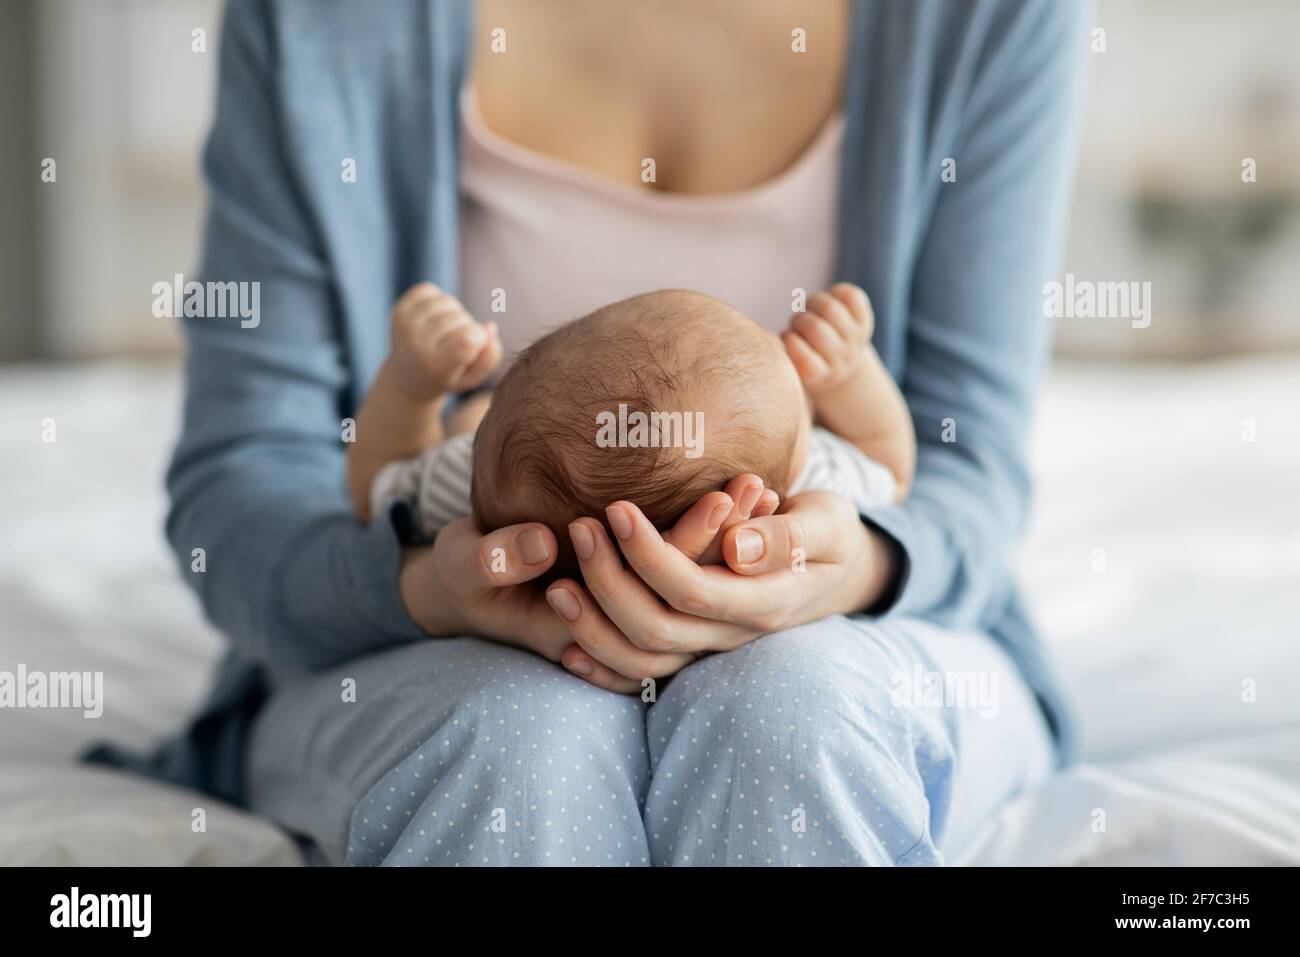 Mother Care. Unrecognizable mom holding newborn baby on her laps Stock Photo